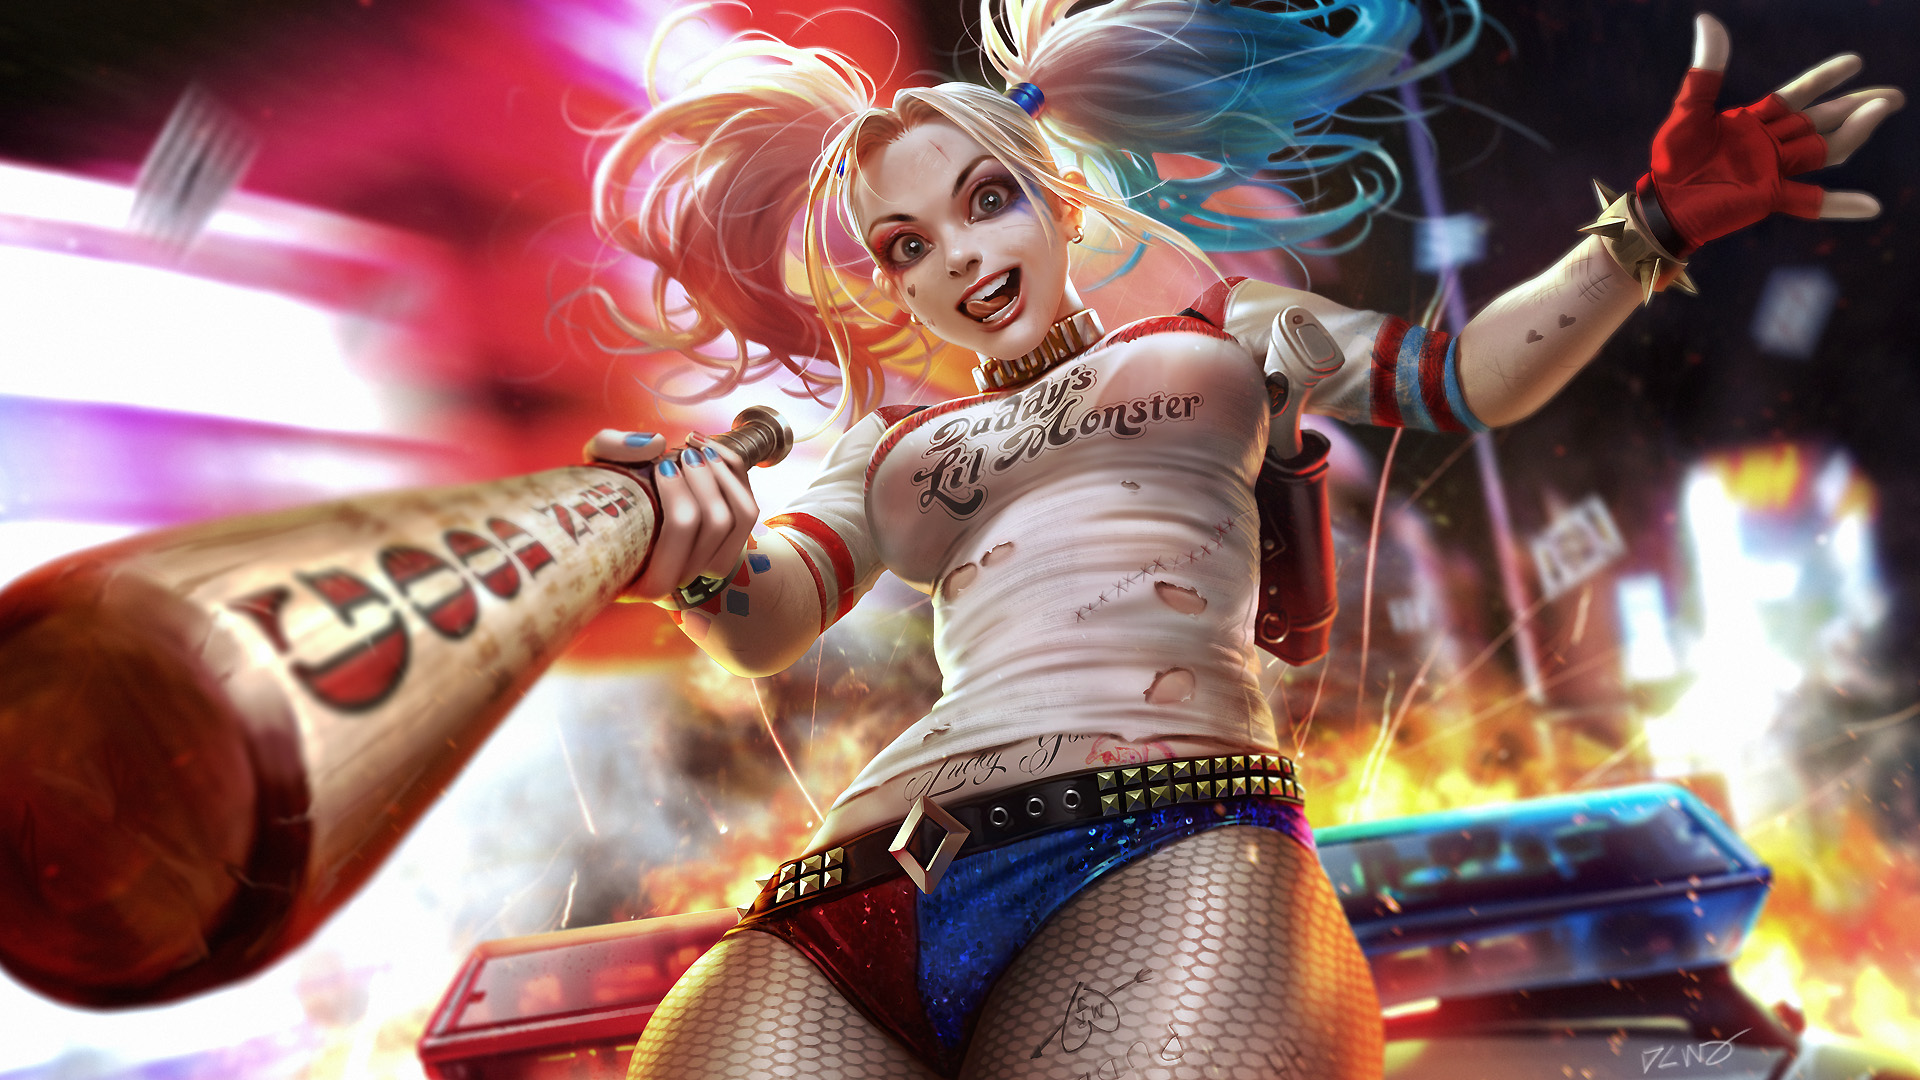 Harley Quinn Porn Hentai Nightgown - Harley Quinn Amazing Art Hd Artist 4k Wallpapers Images | Free Hot Nude Porn  Pic Gallery